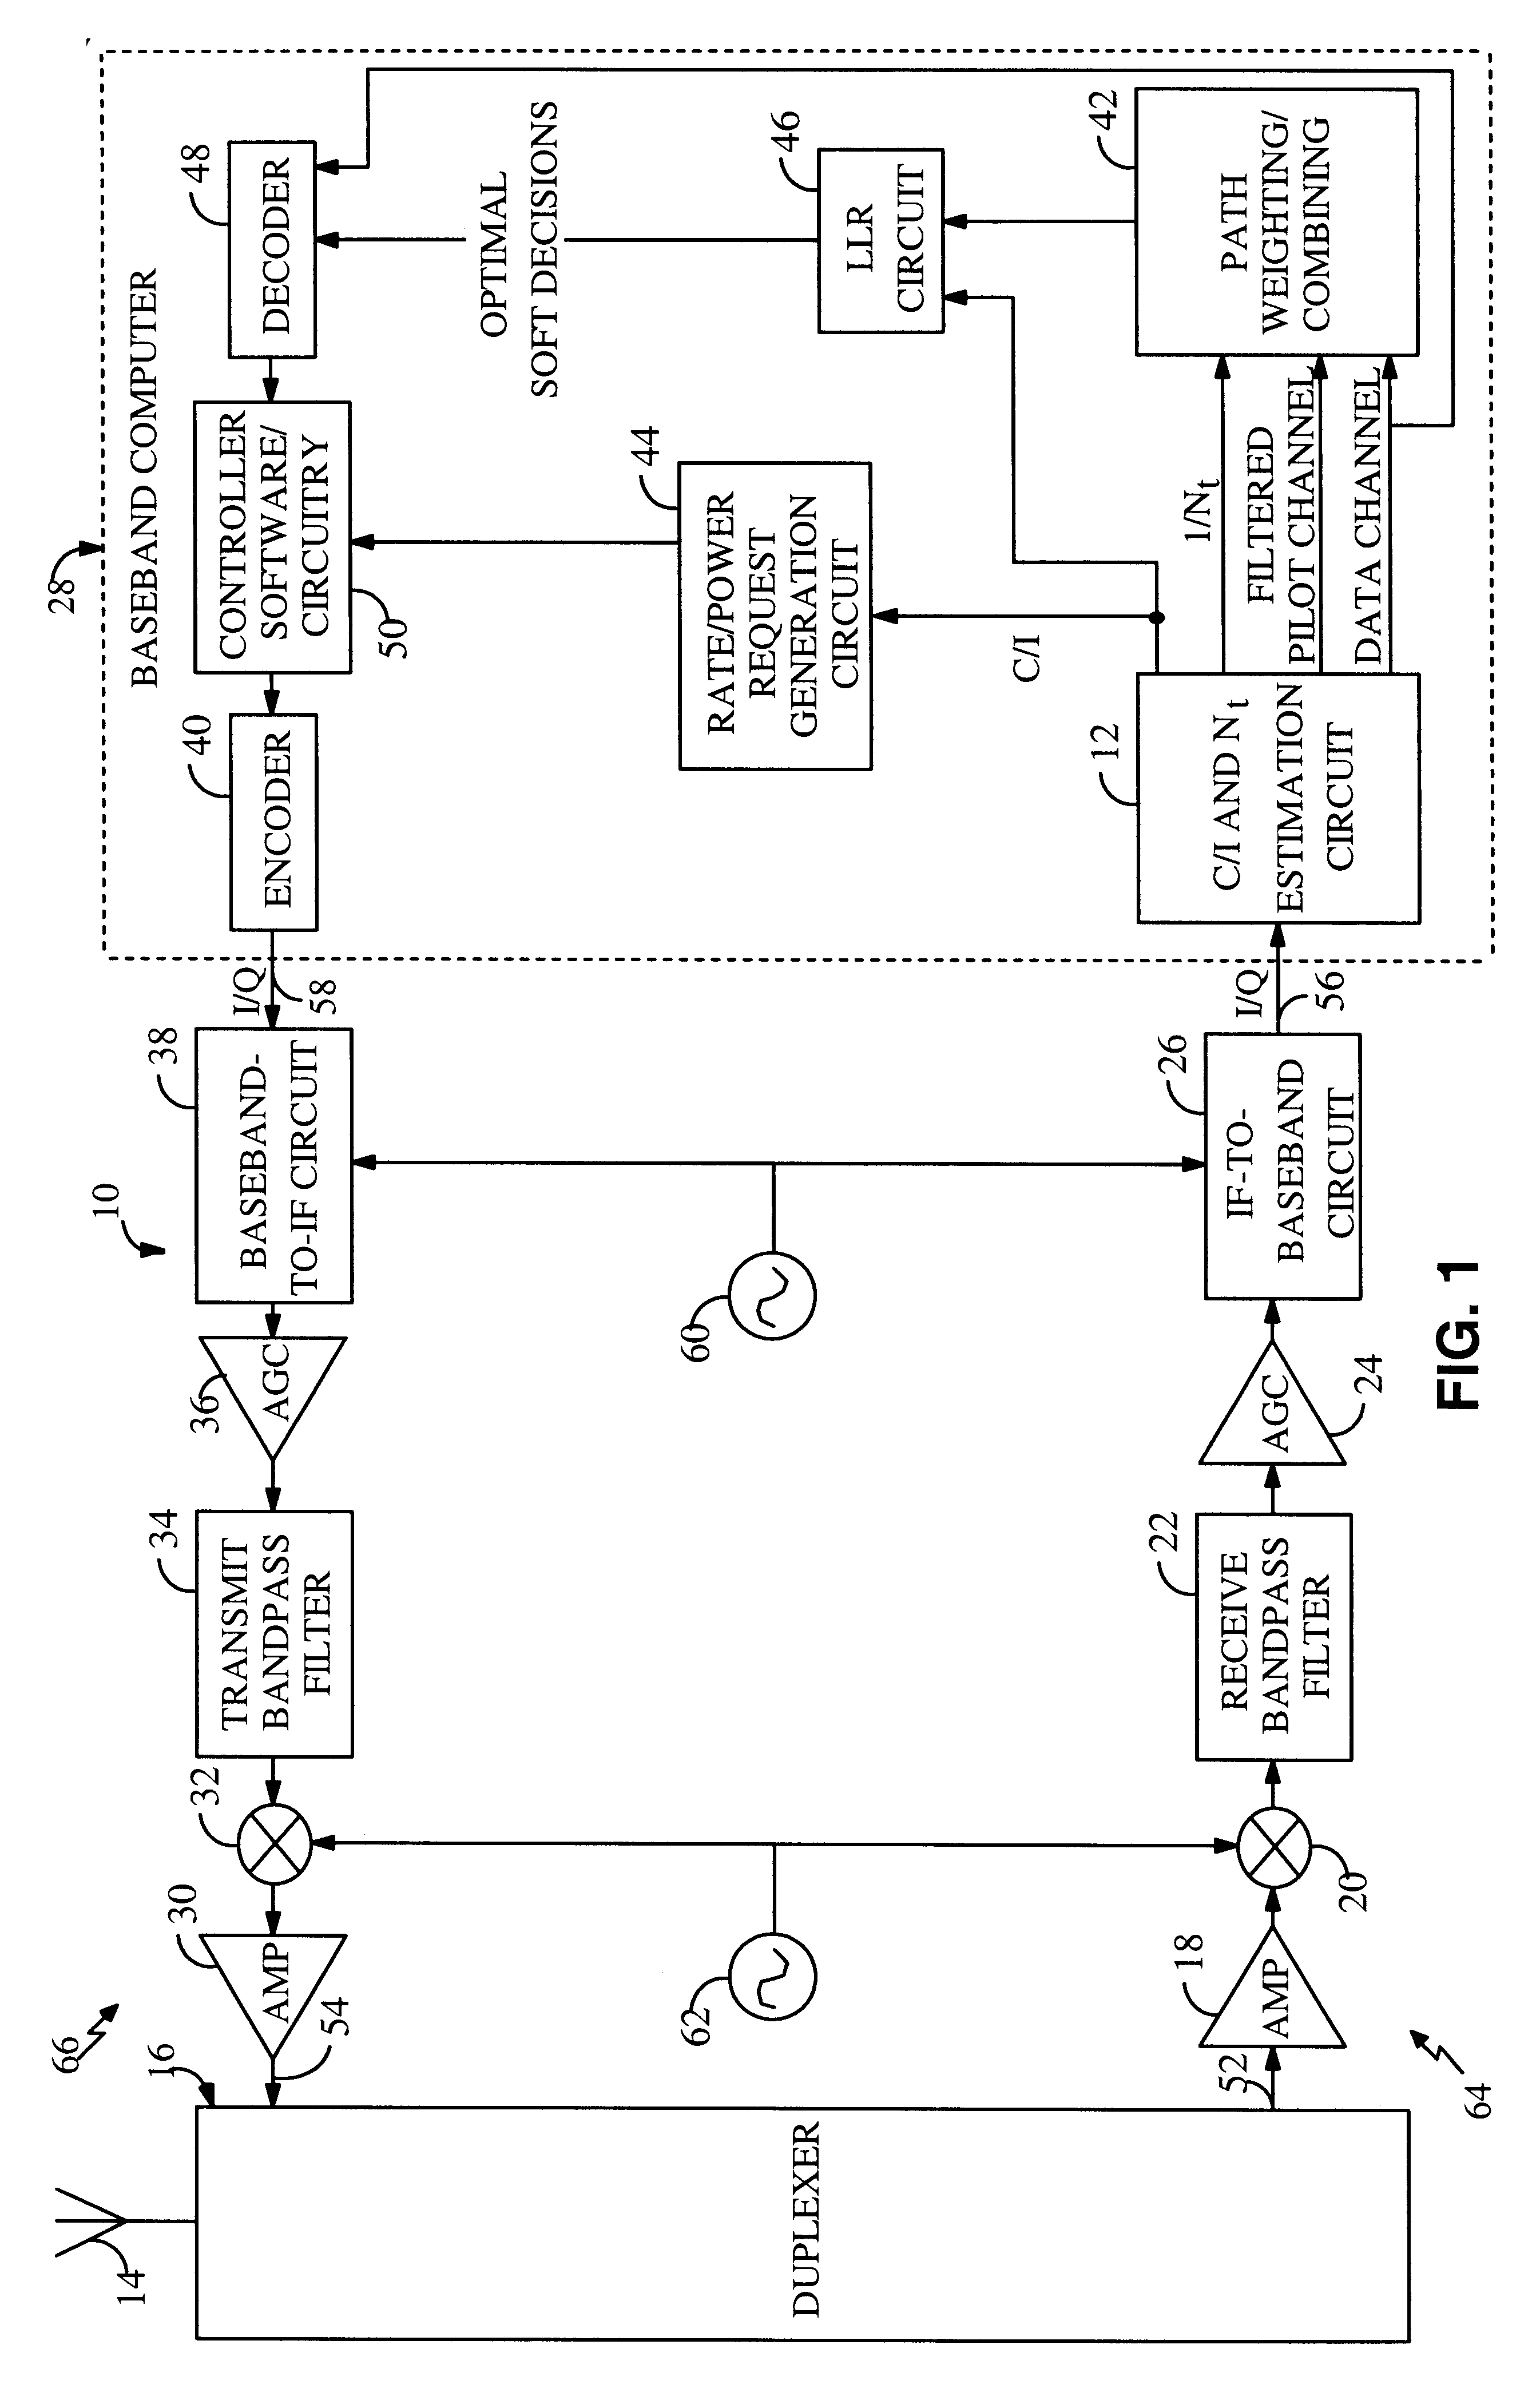 System and method for providing an accurate estimation of received signal interference for use in wireless communications systems